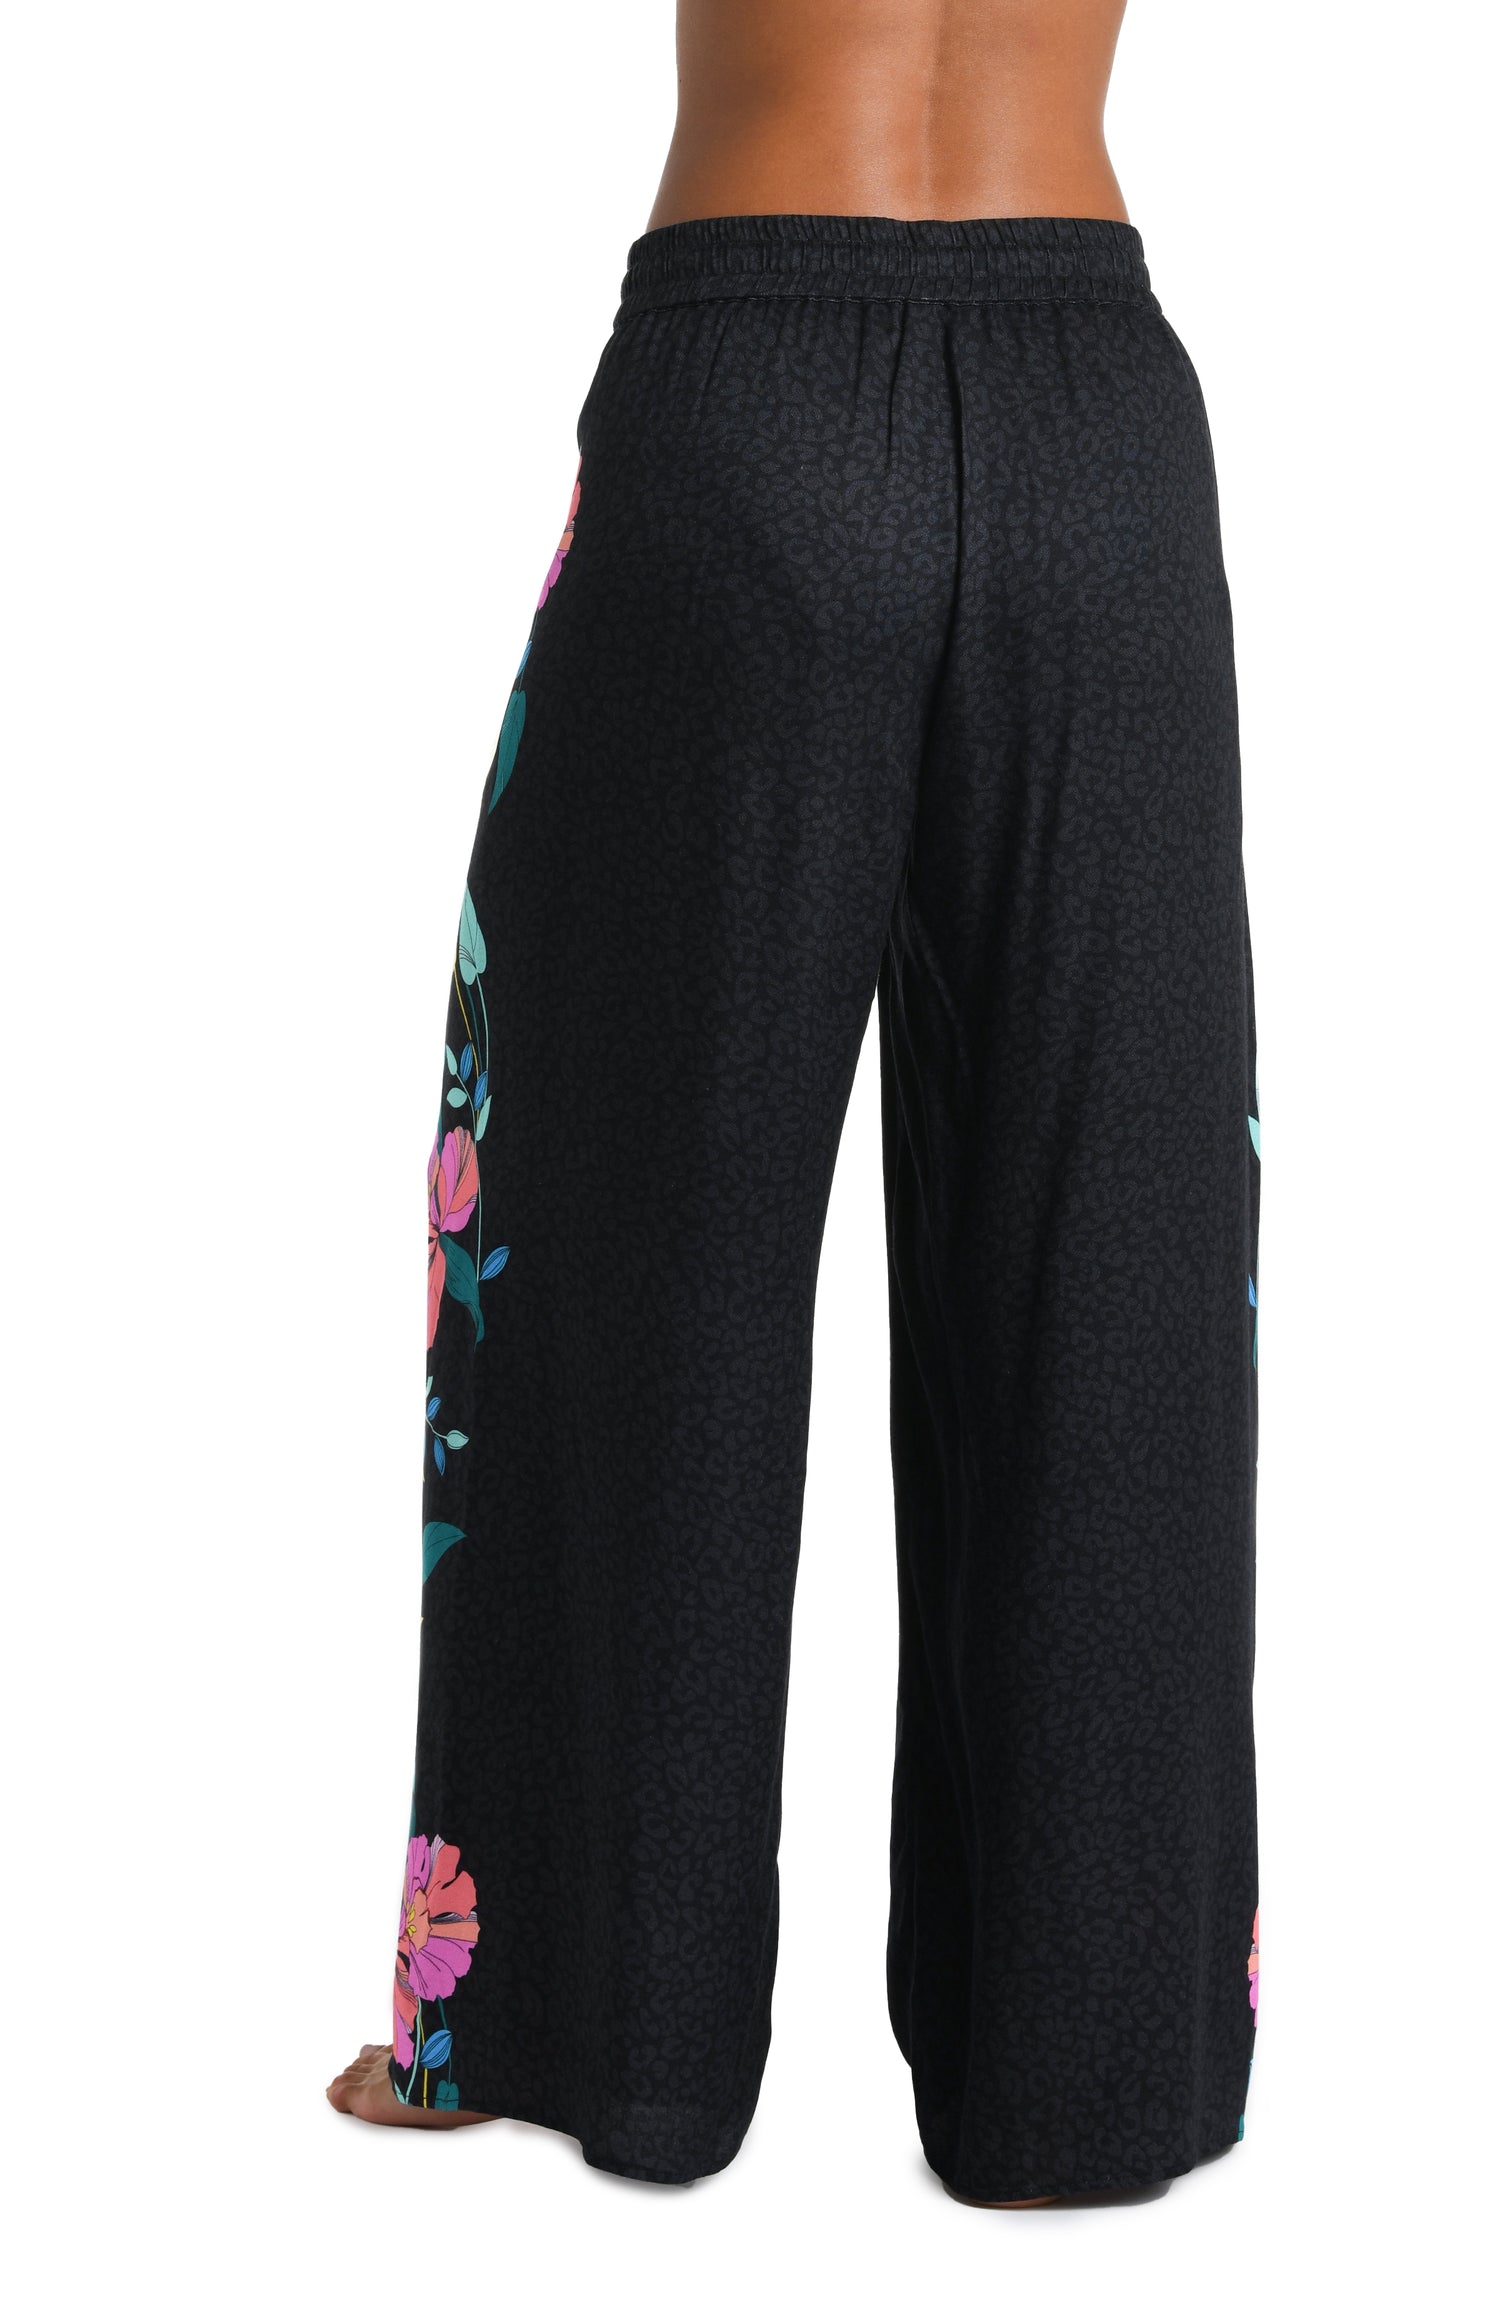 Model is wearing a black, pink, and green multicolored floral patterned Beach Pant